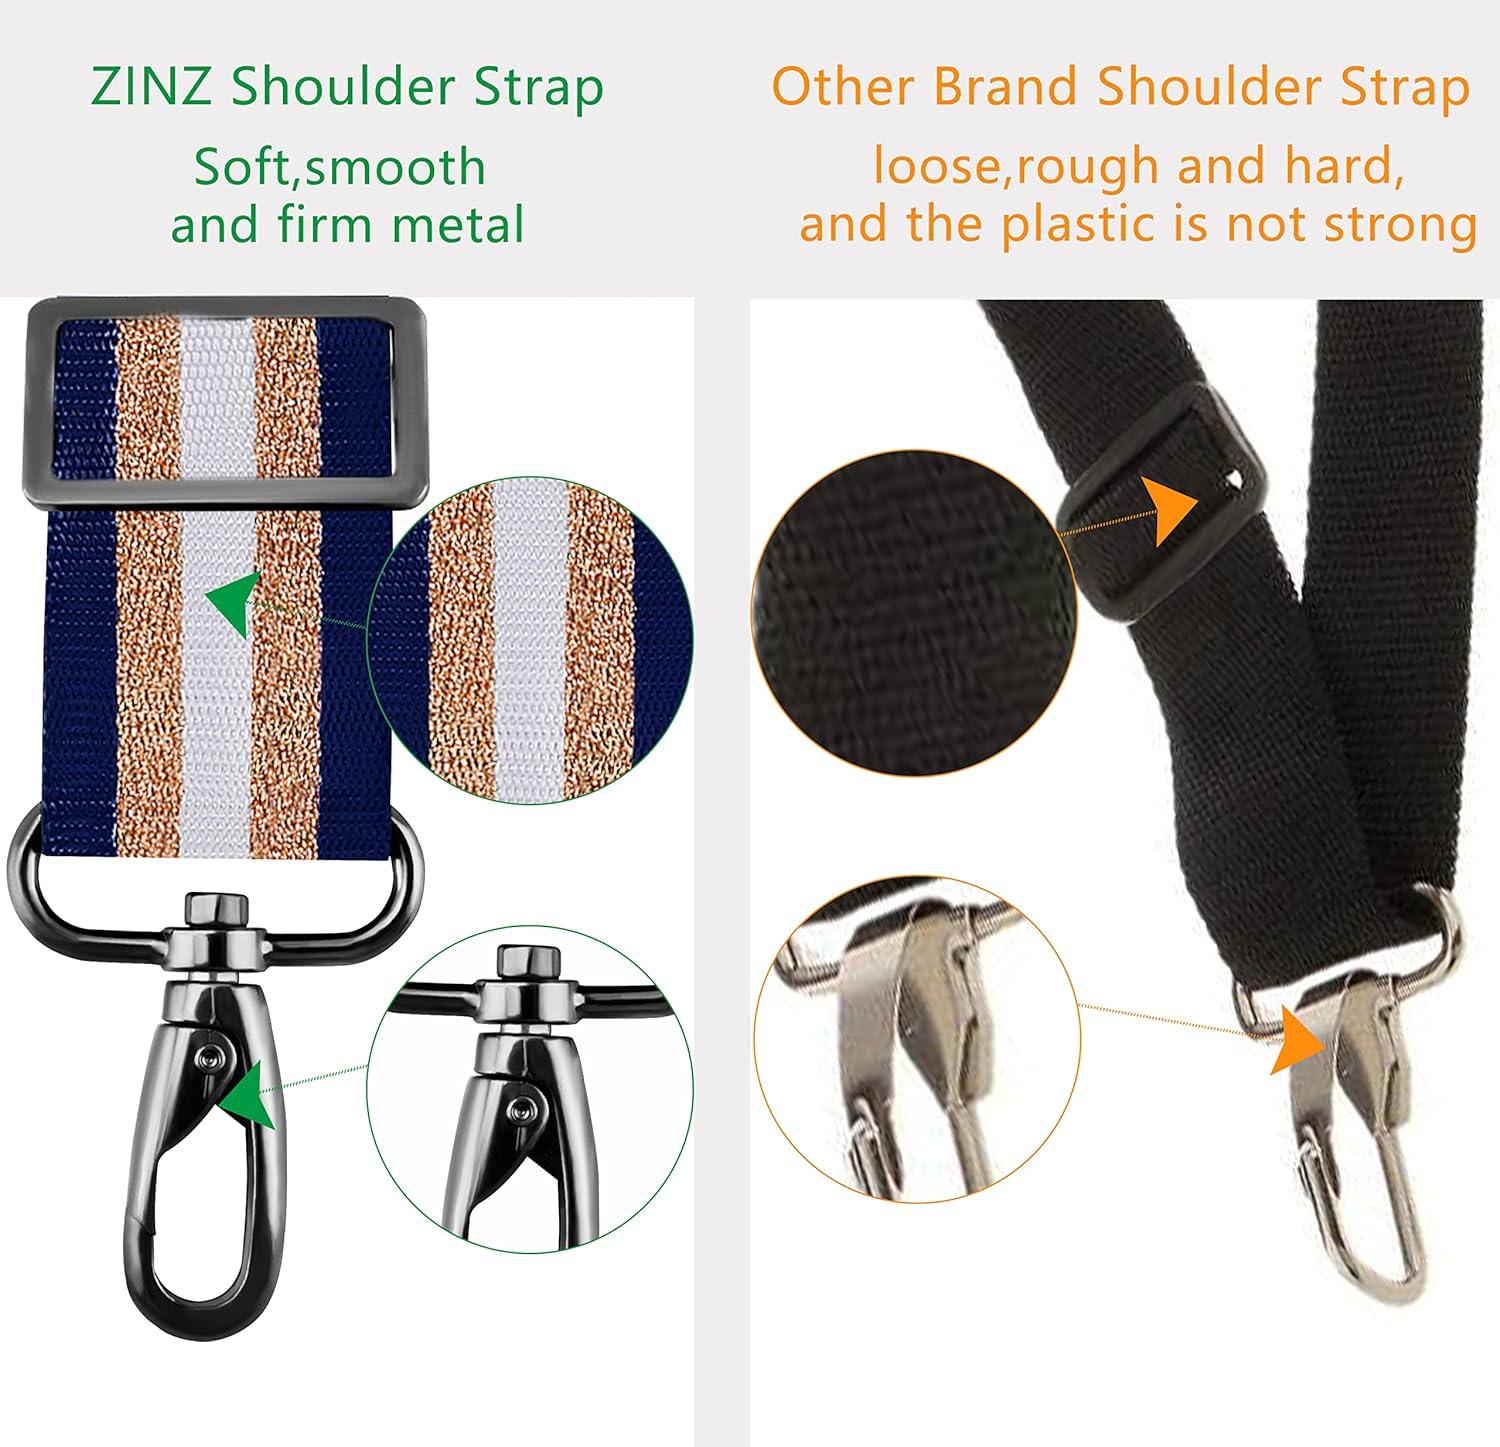 ZINZ 79 inch Shoulder Strap Extra-thick Fixed Cushion Pad and Dual Clasps  Universal Replacement Strap with Metal Swivel Hooks for Laptop Bags Luggage  Bags Camera Crossbody (200cm Blue)